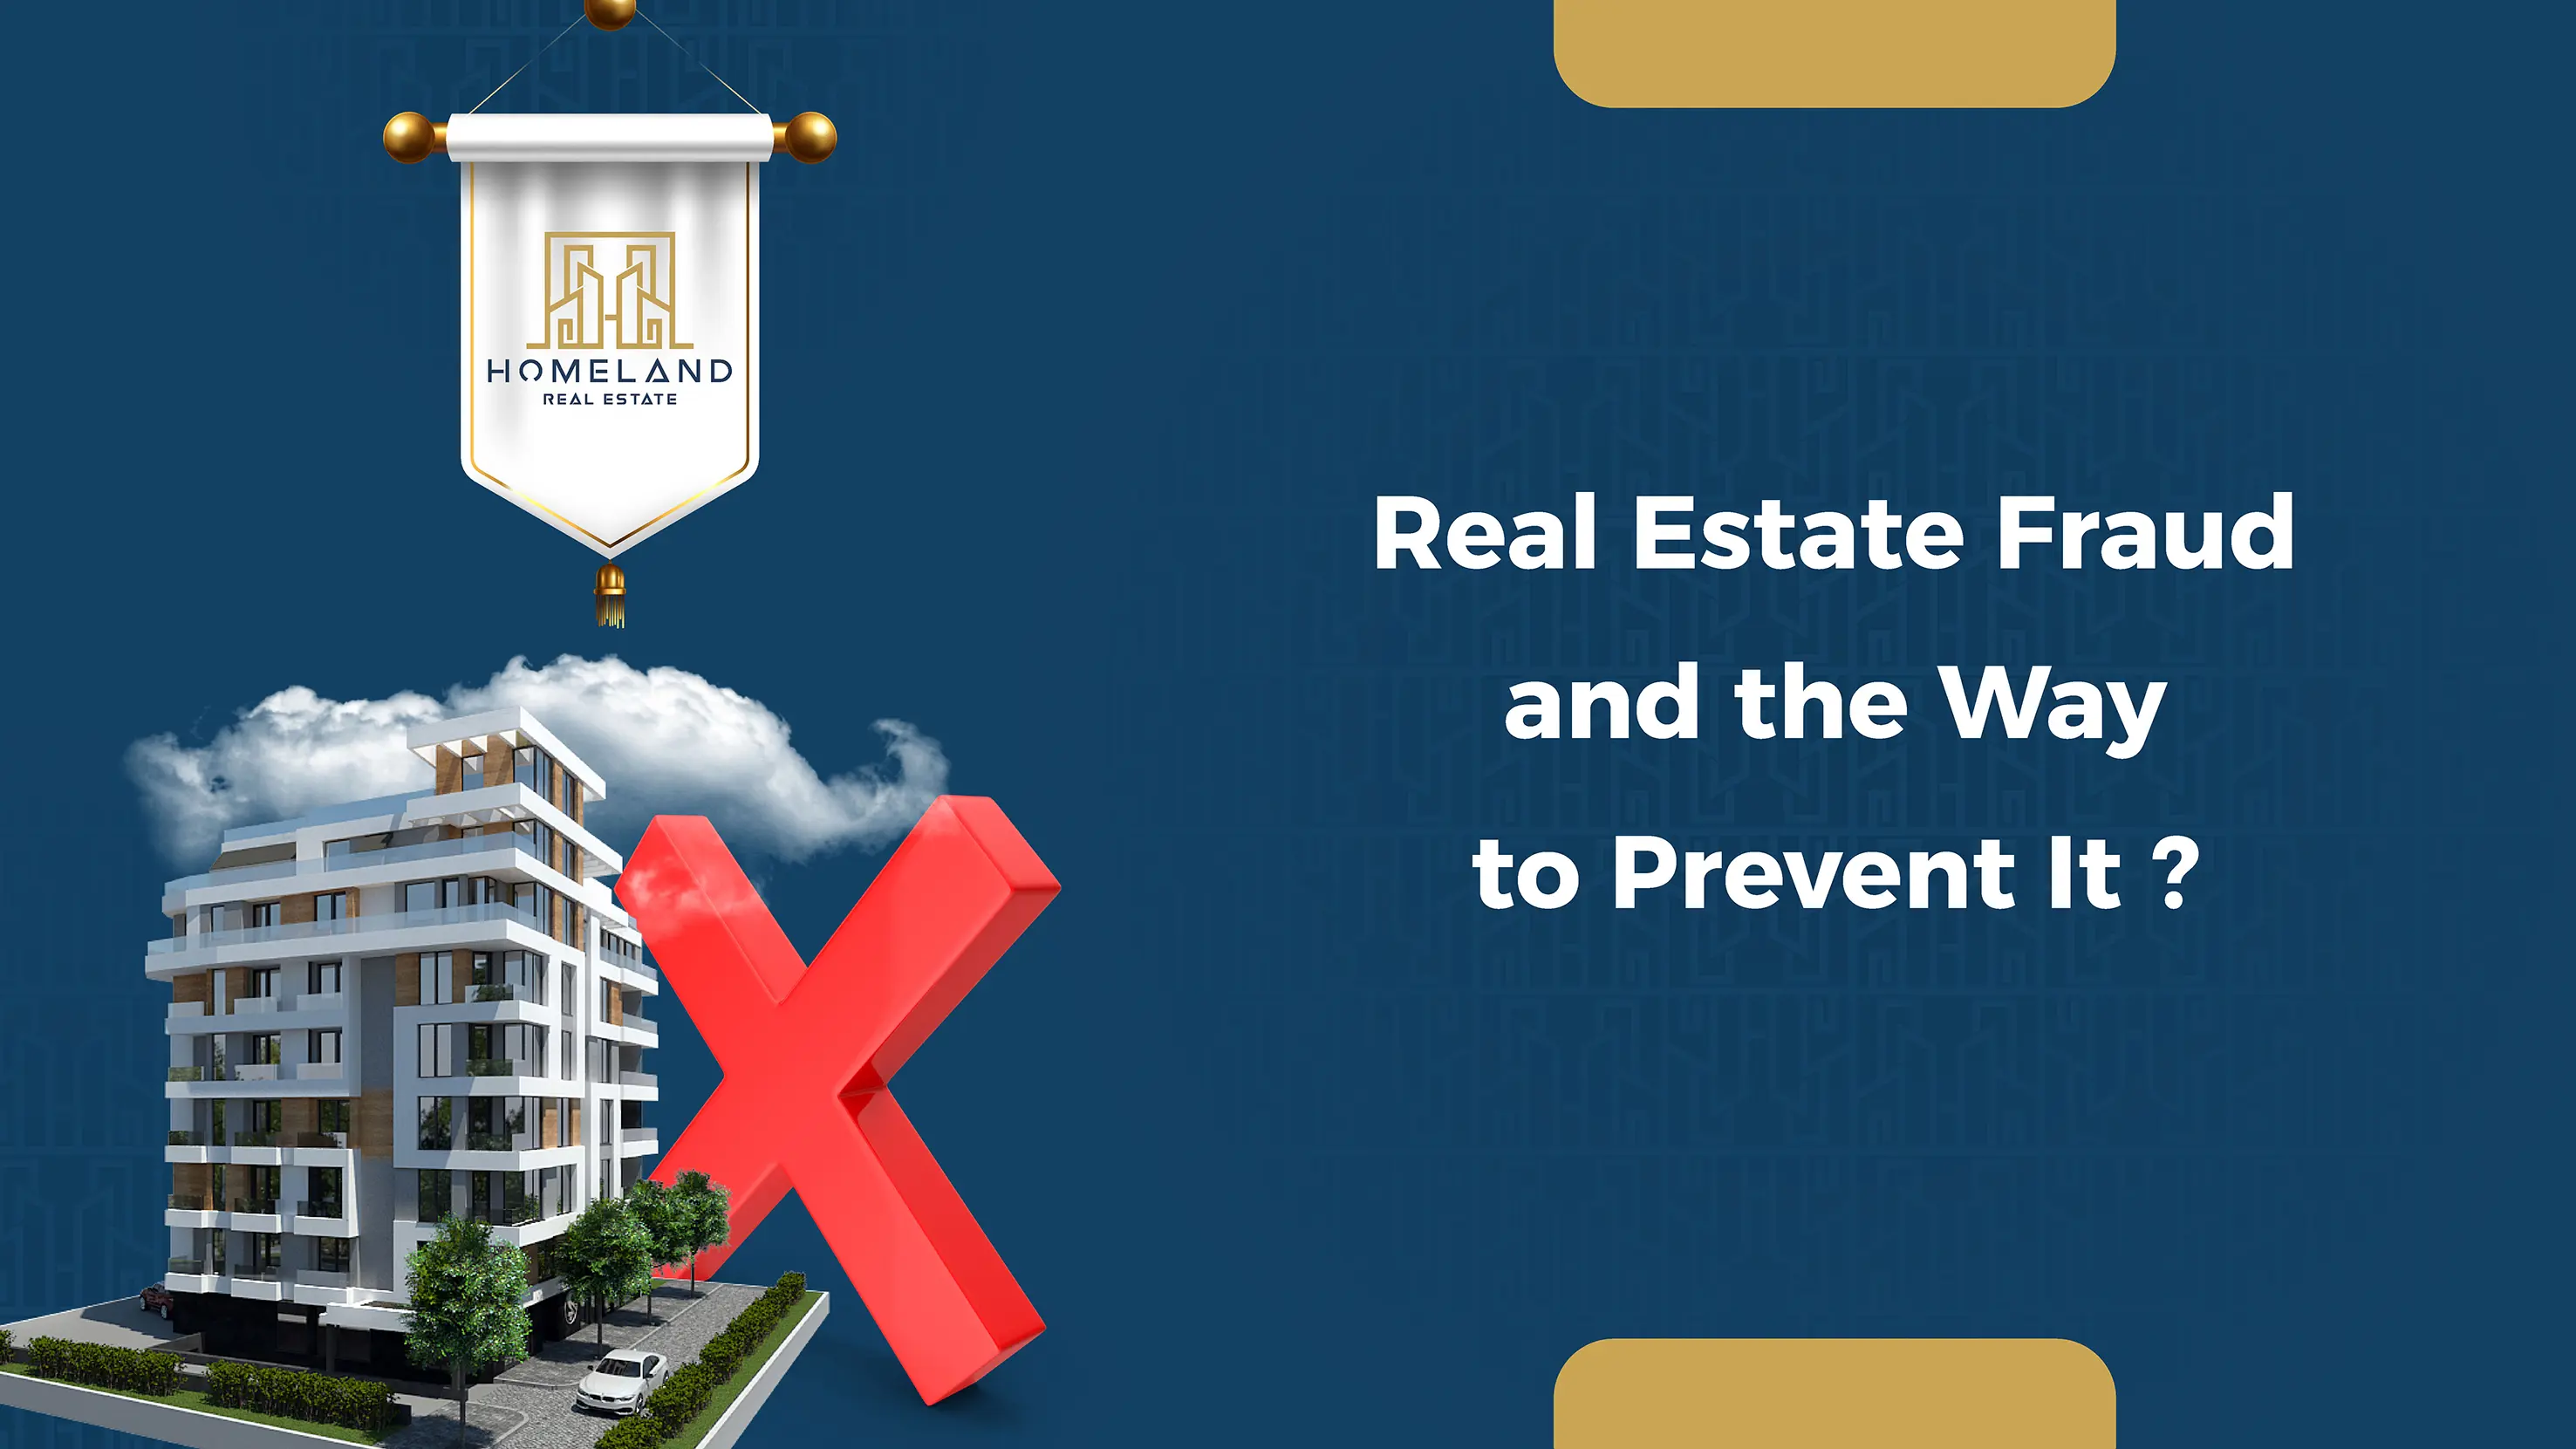 Real Estate Fraud and the Way to Prevent It